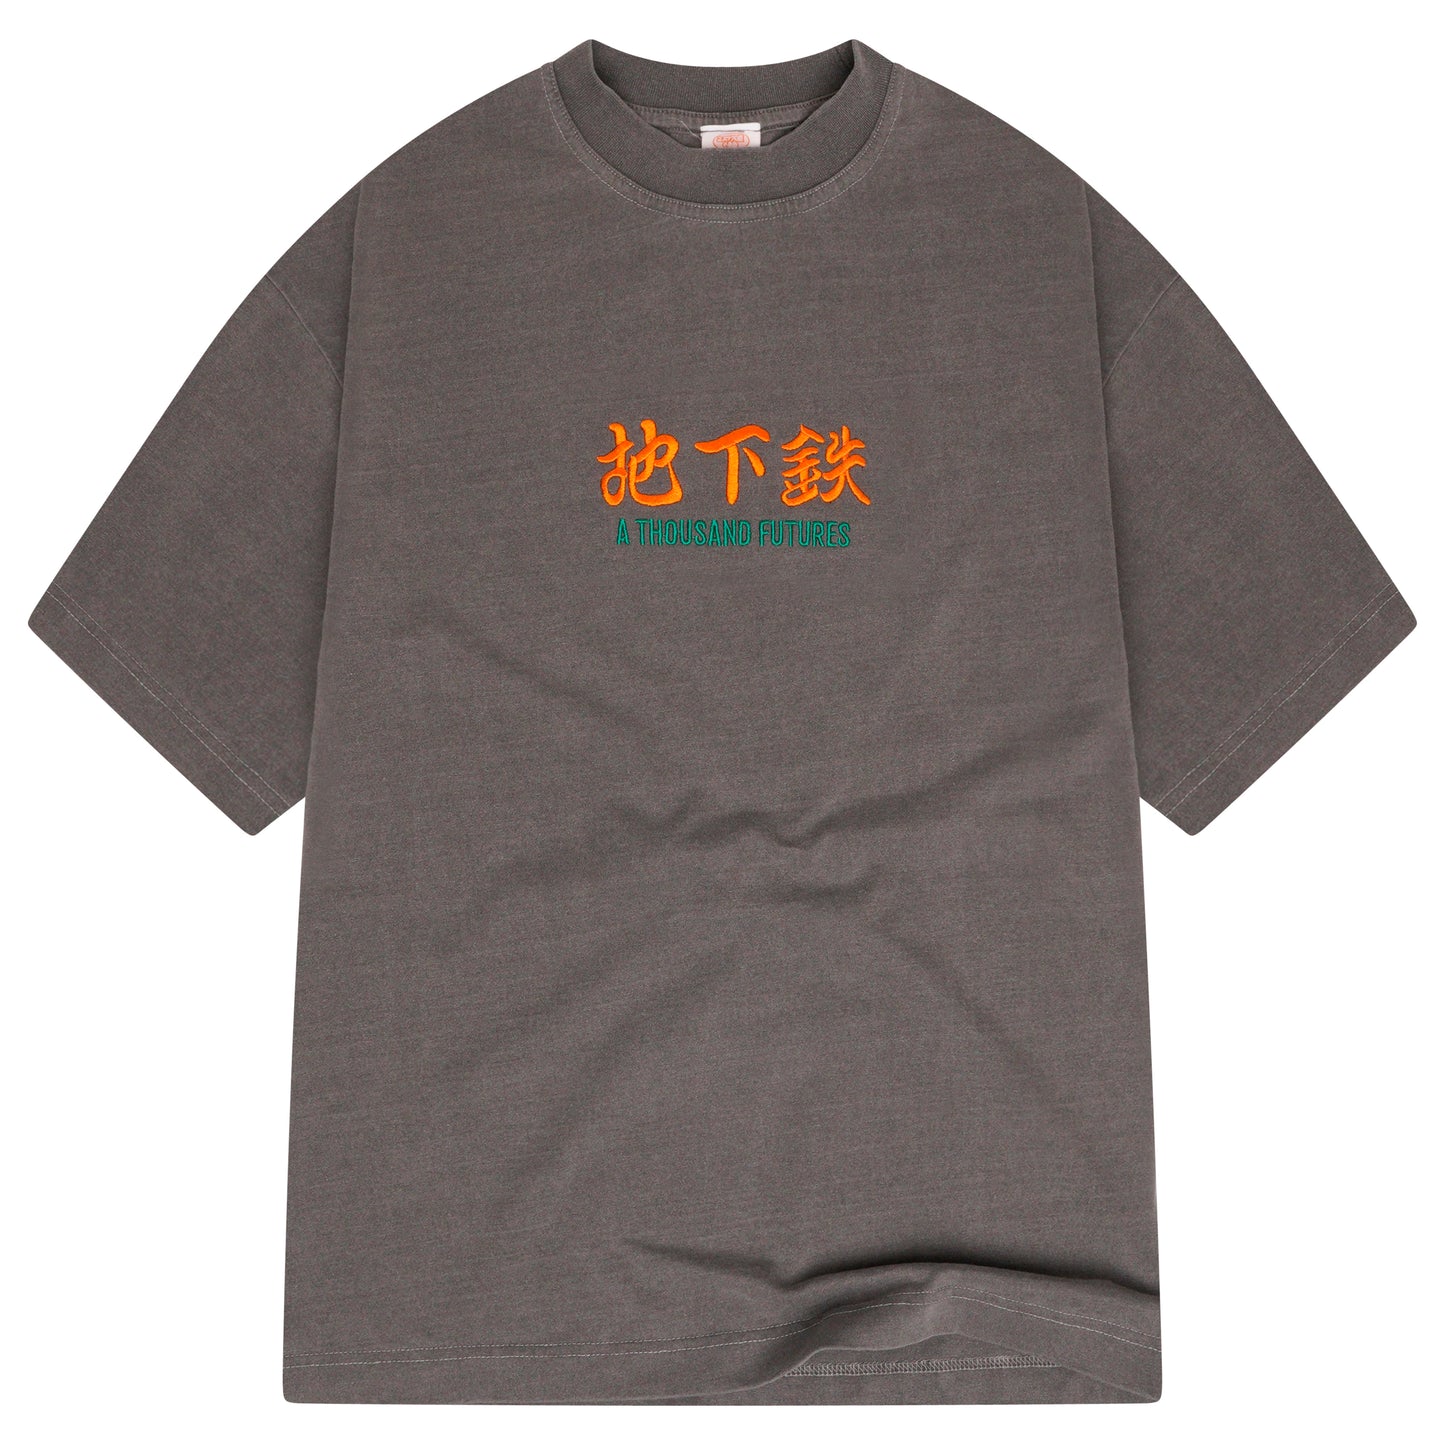 A Thousand Futures 'Logo' Embroidered Vintage Washed Tee - Charcoal